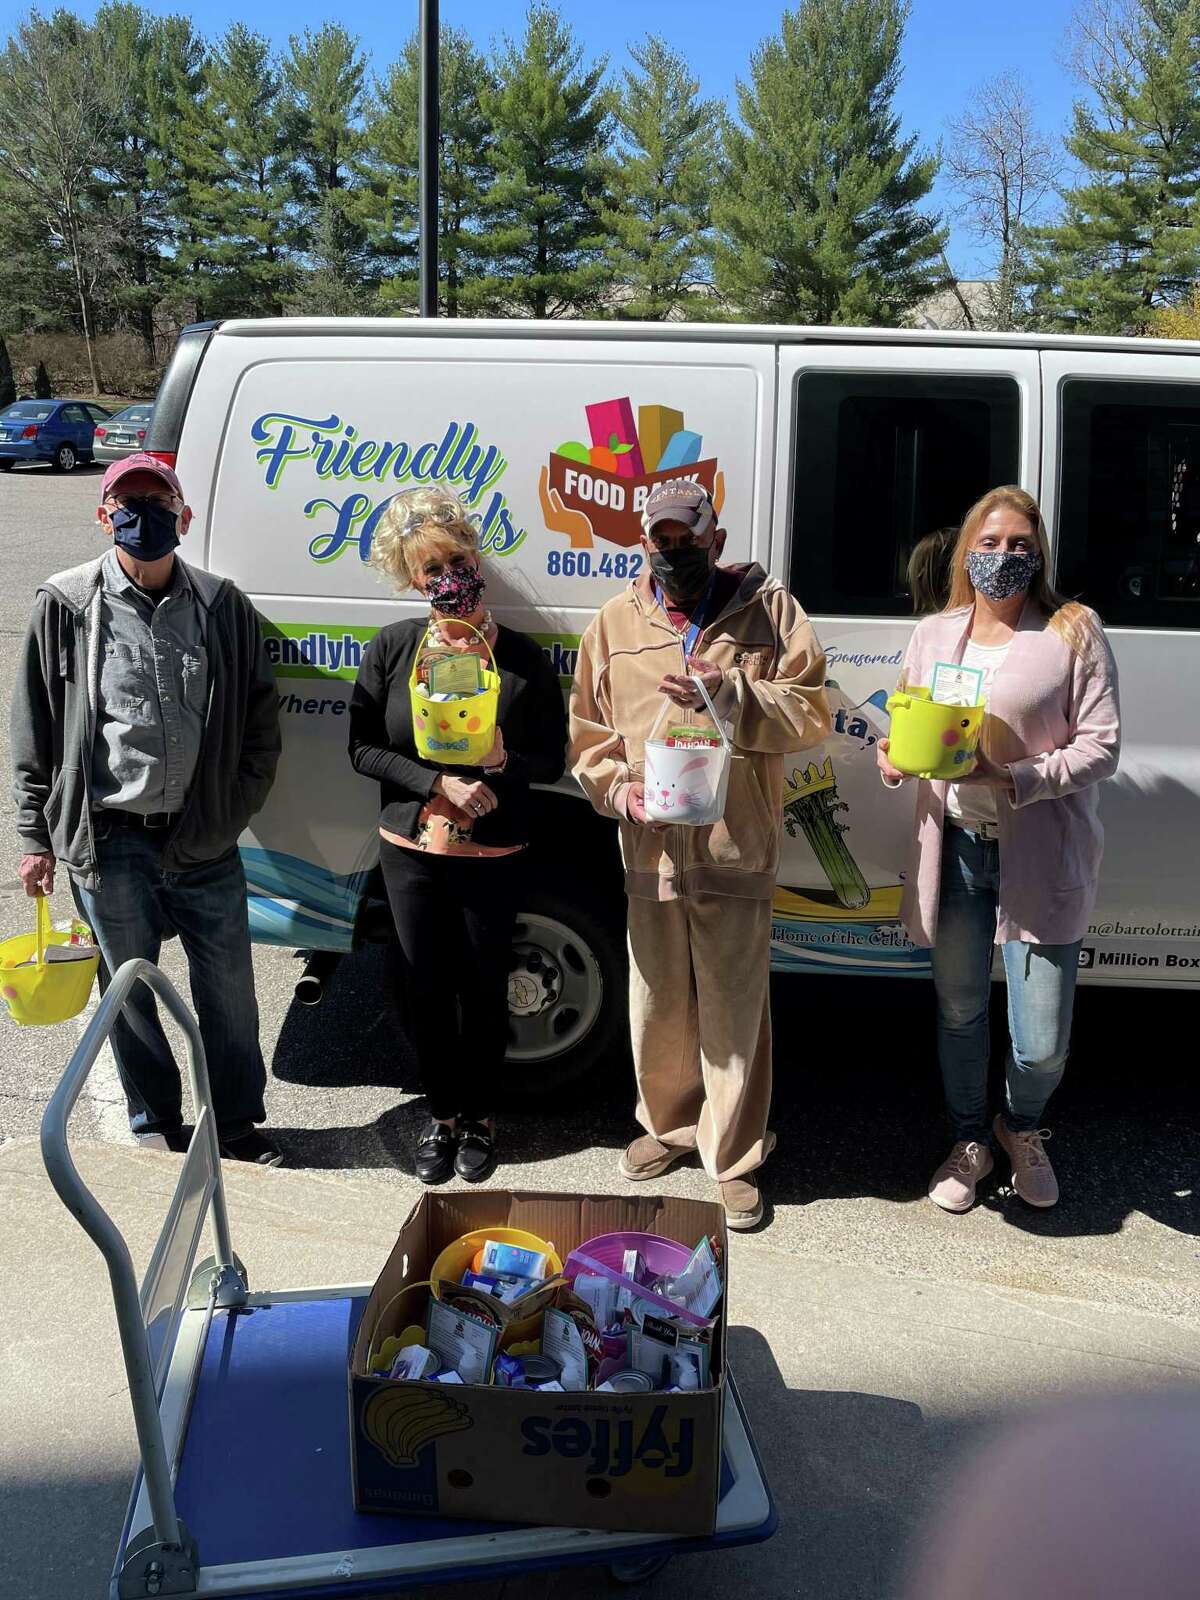 Friendly Hands Food Bank in Torrington brought Easter baskets to senior housing complexes in the city on March 30.